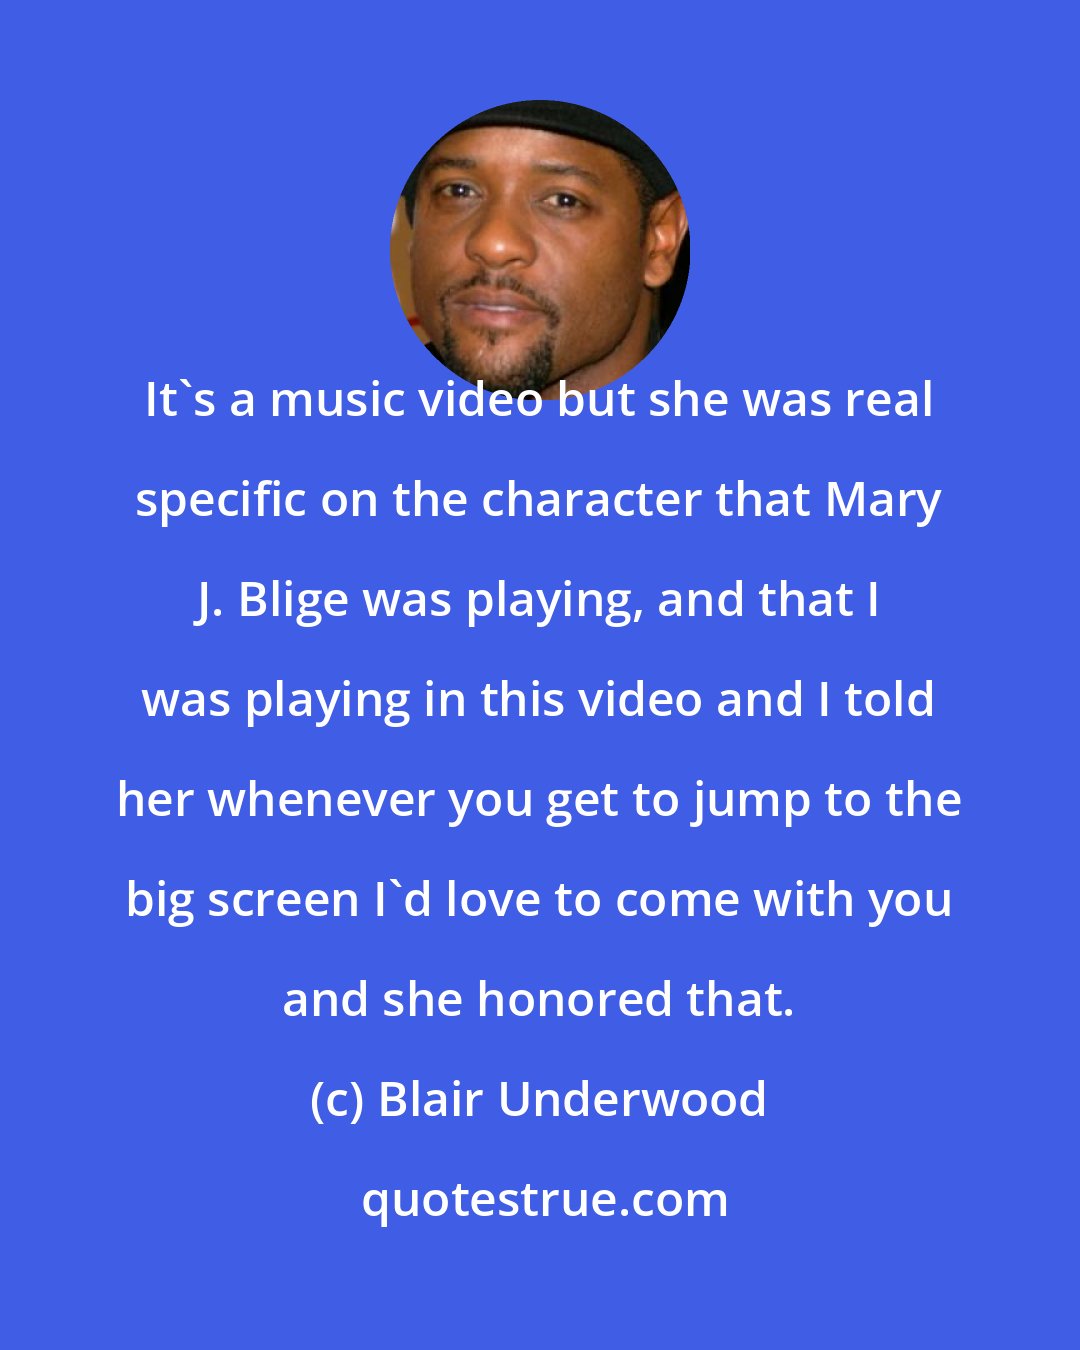 Blair Underwood: It's a music video but she was real specific on the character that Mary J. Blige was playing, and that I was playing in this video and I told her whenever you get to jump to the big screen I'd love to come with you and she honored that.